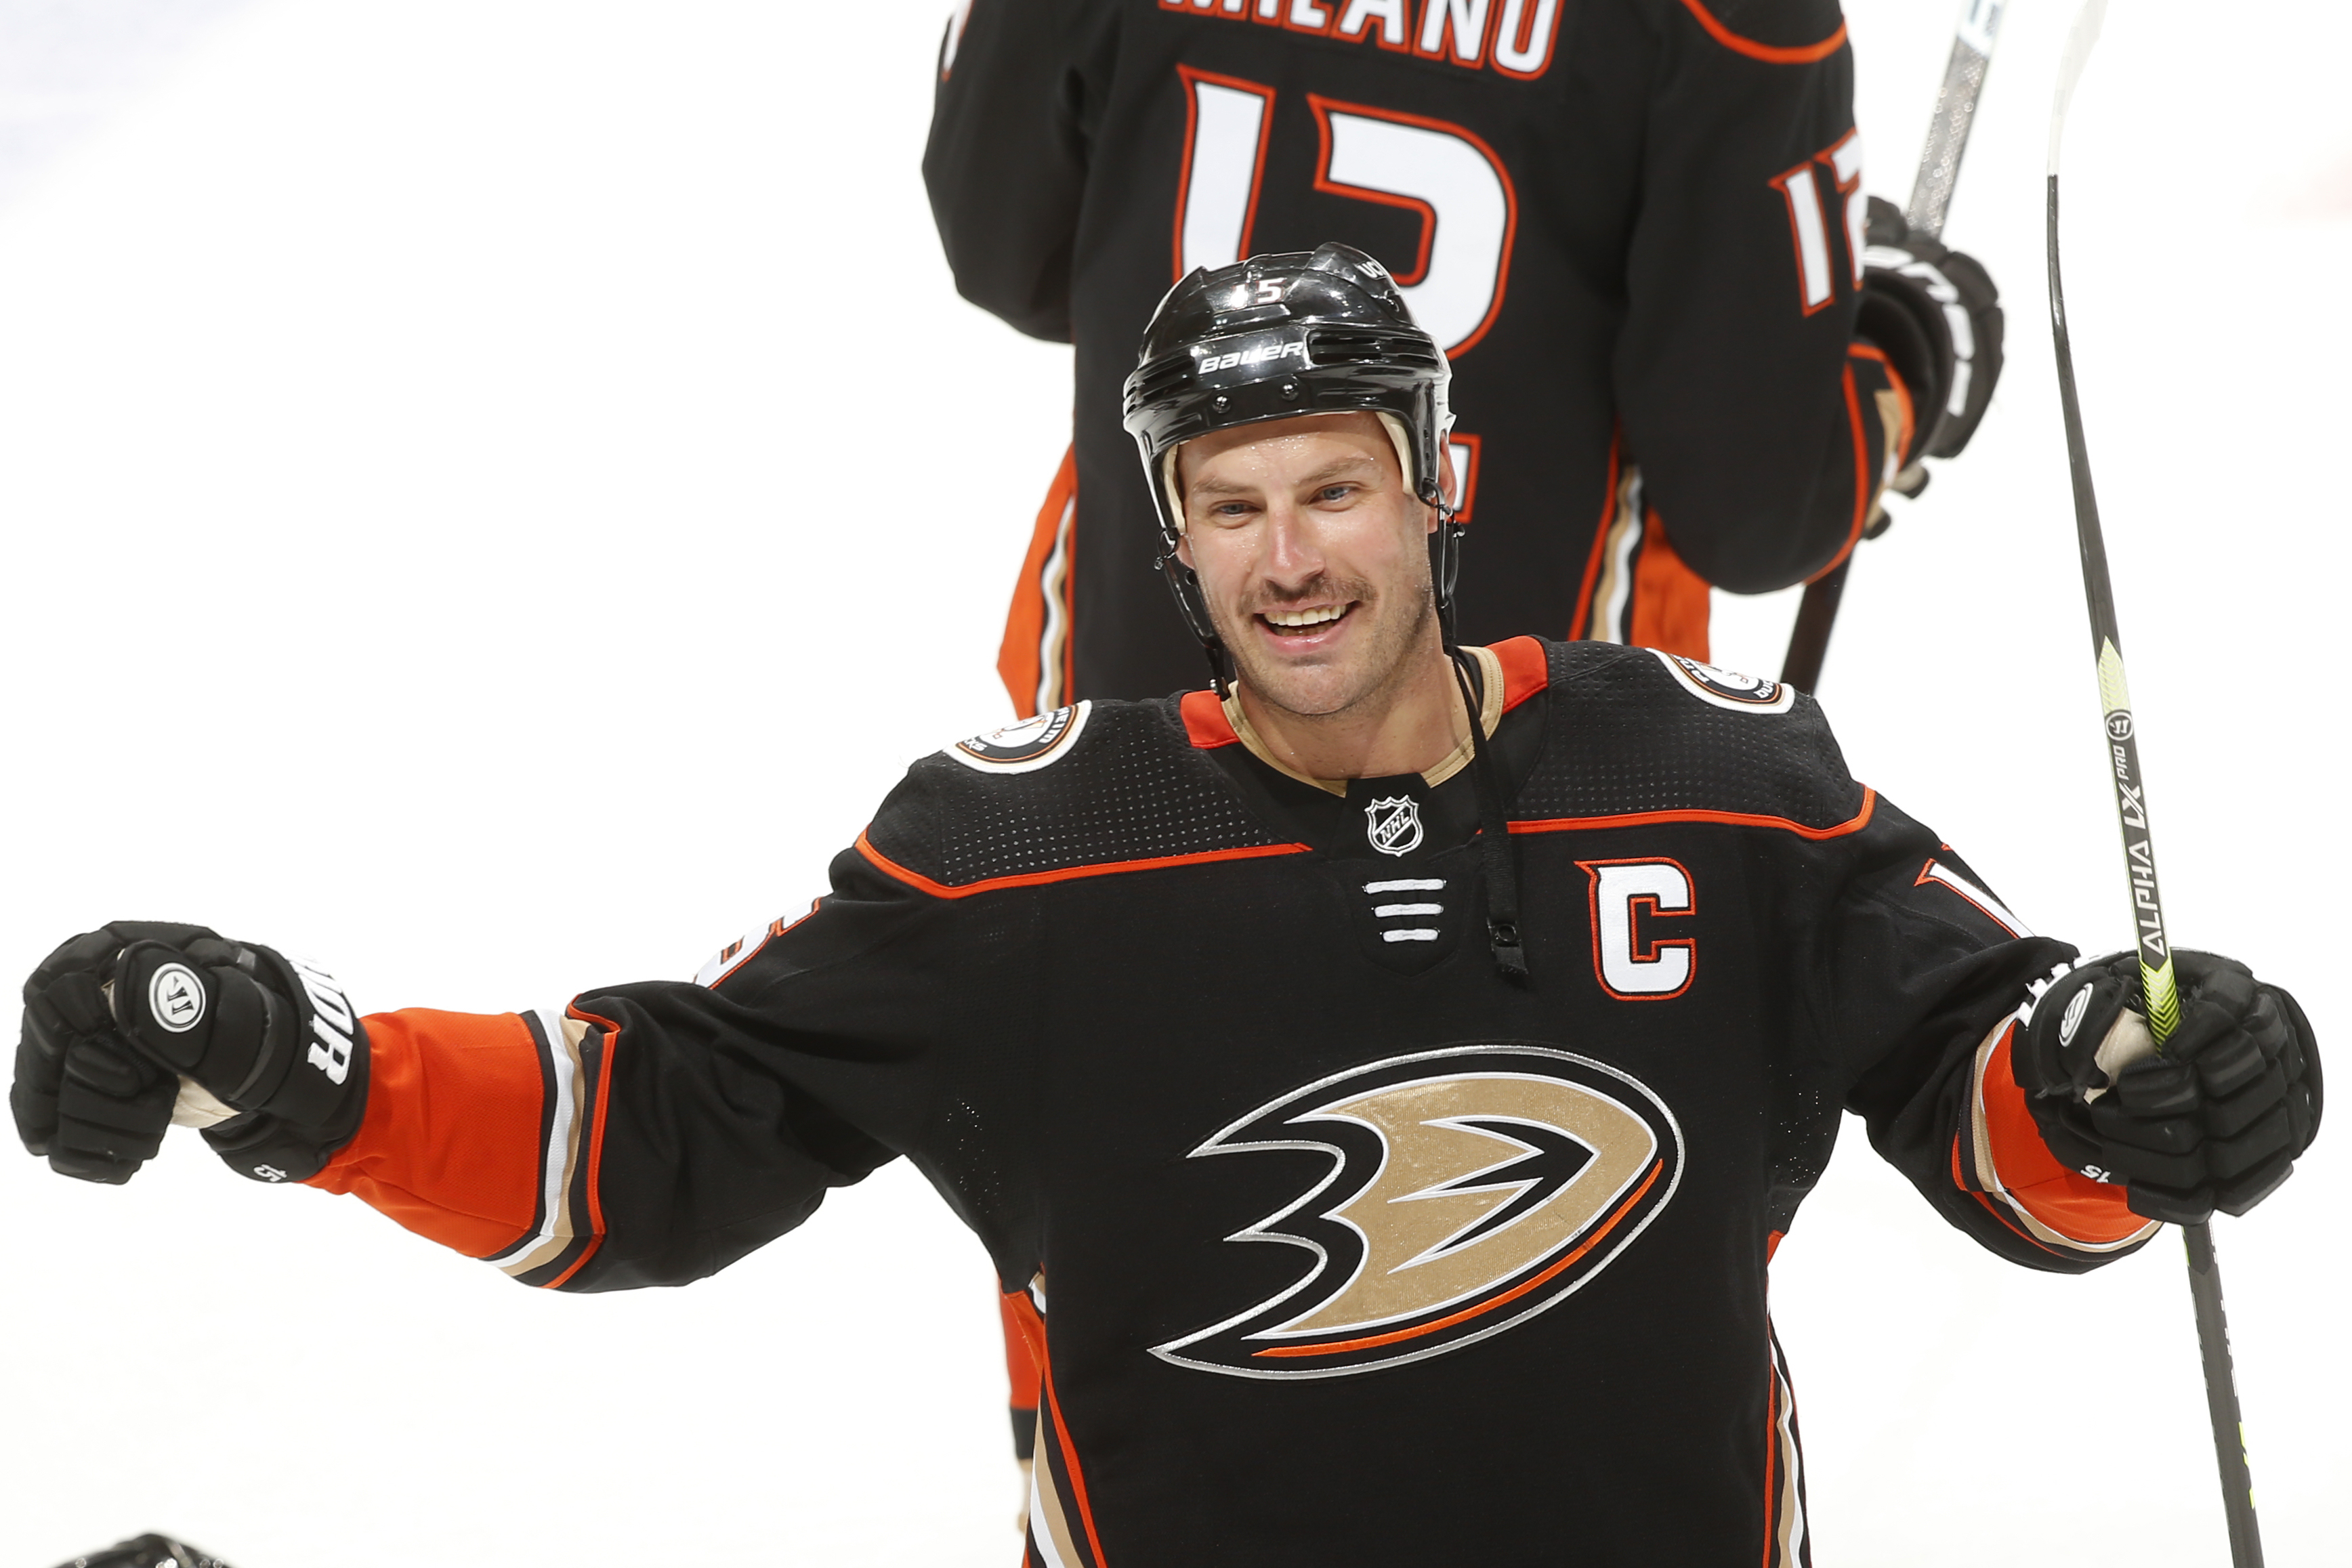 Ryan Getzlaf #15 of the Anaheim Ducks celebrates their win with teammates during overtime against the Washington Capitals on the Anaheim Ducks franchises 1,000th win and his 1,000th point at Honda Center on November 16, 2021 in Anaheim, California.